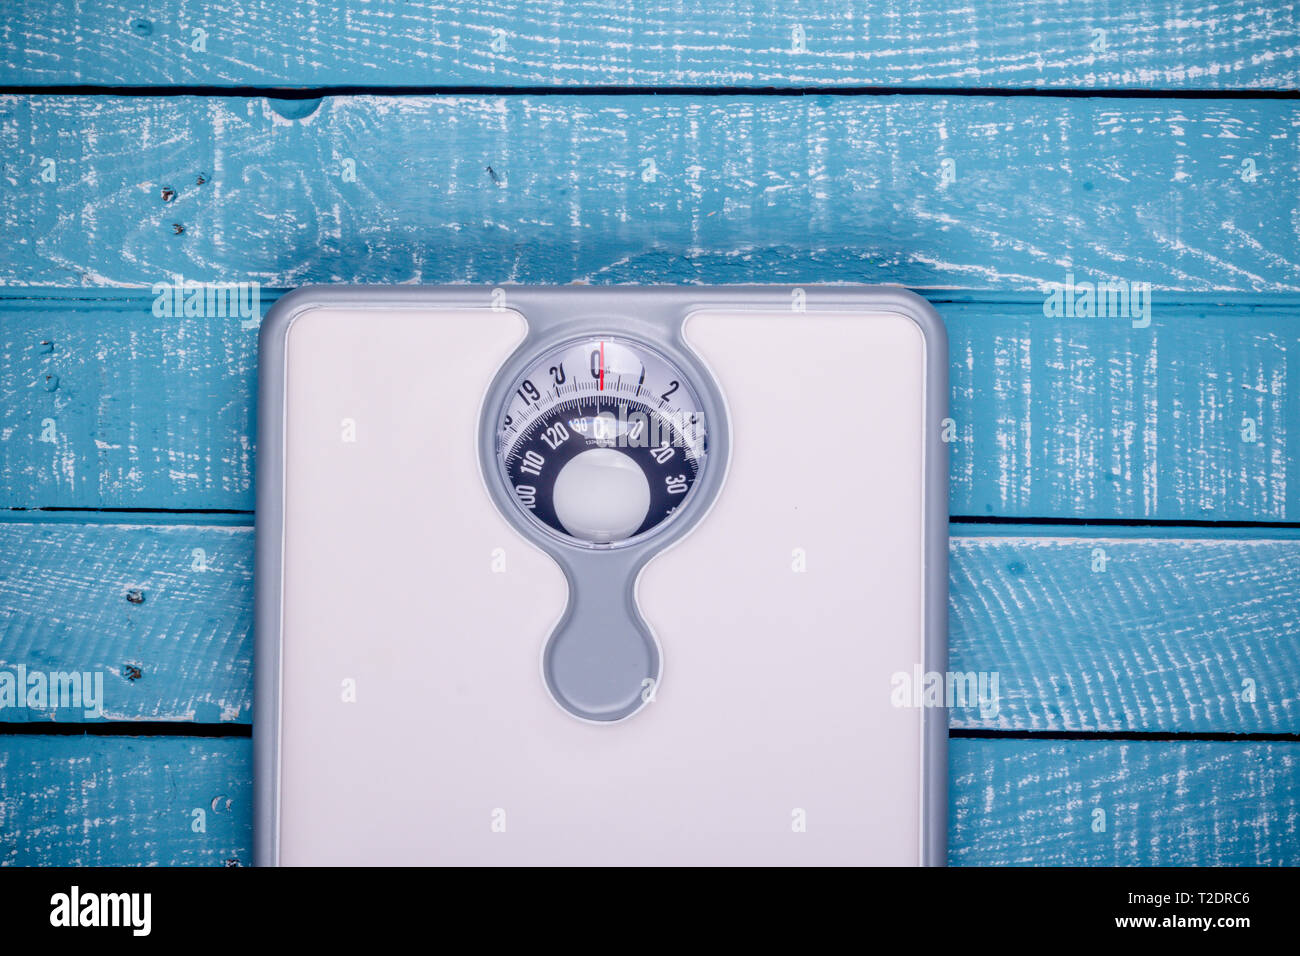 Weight loss concept showing a bathroom scales Stock Photo